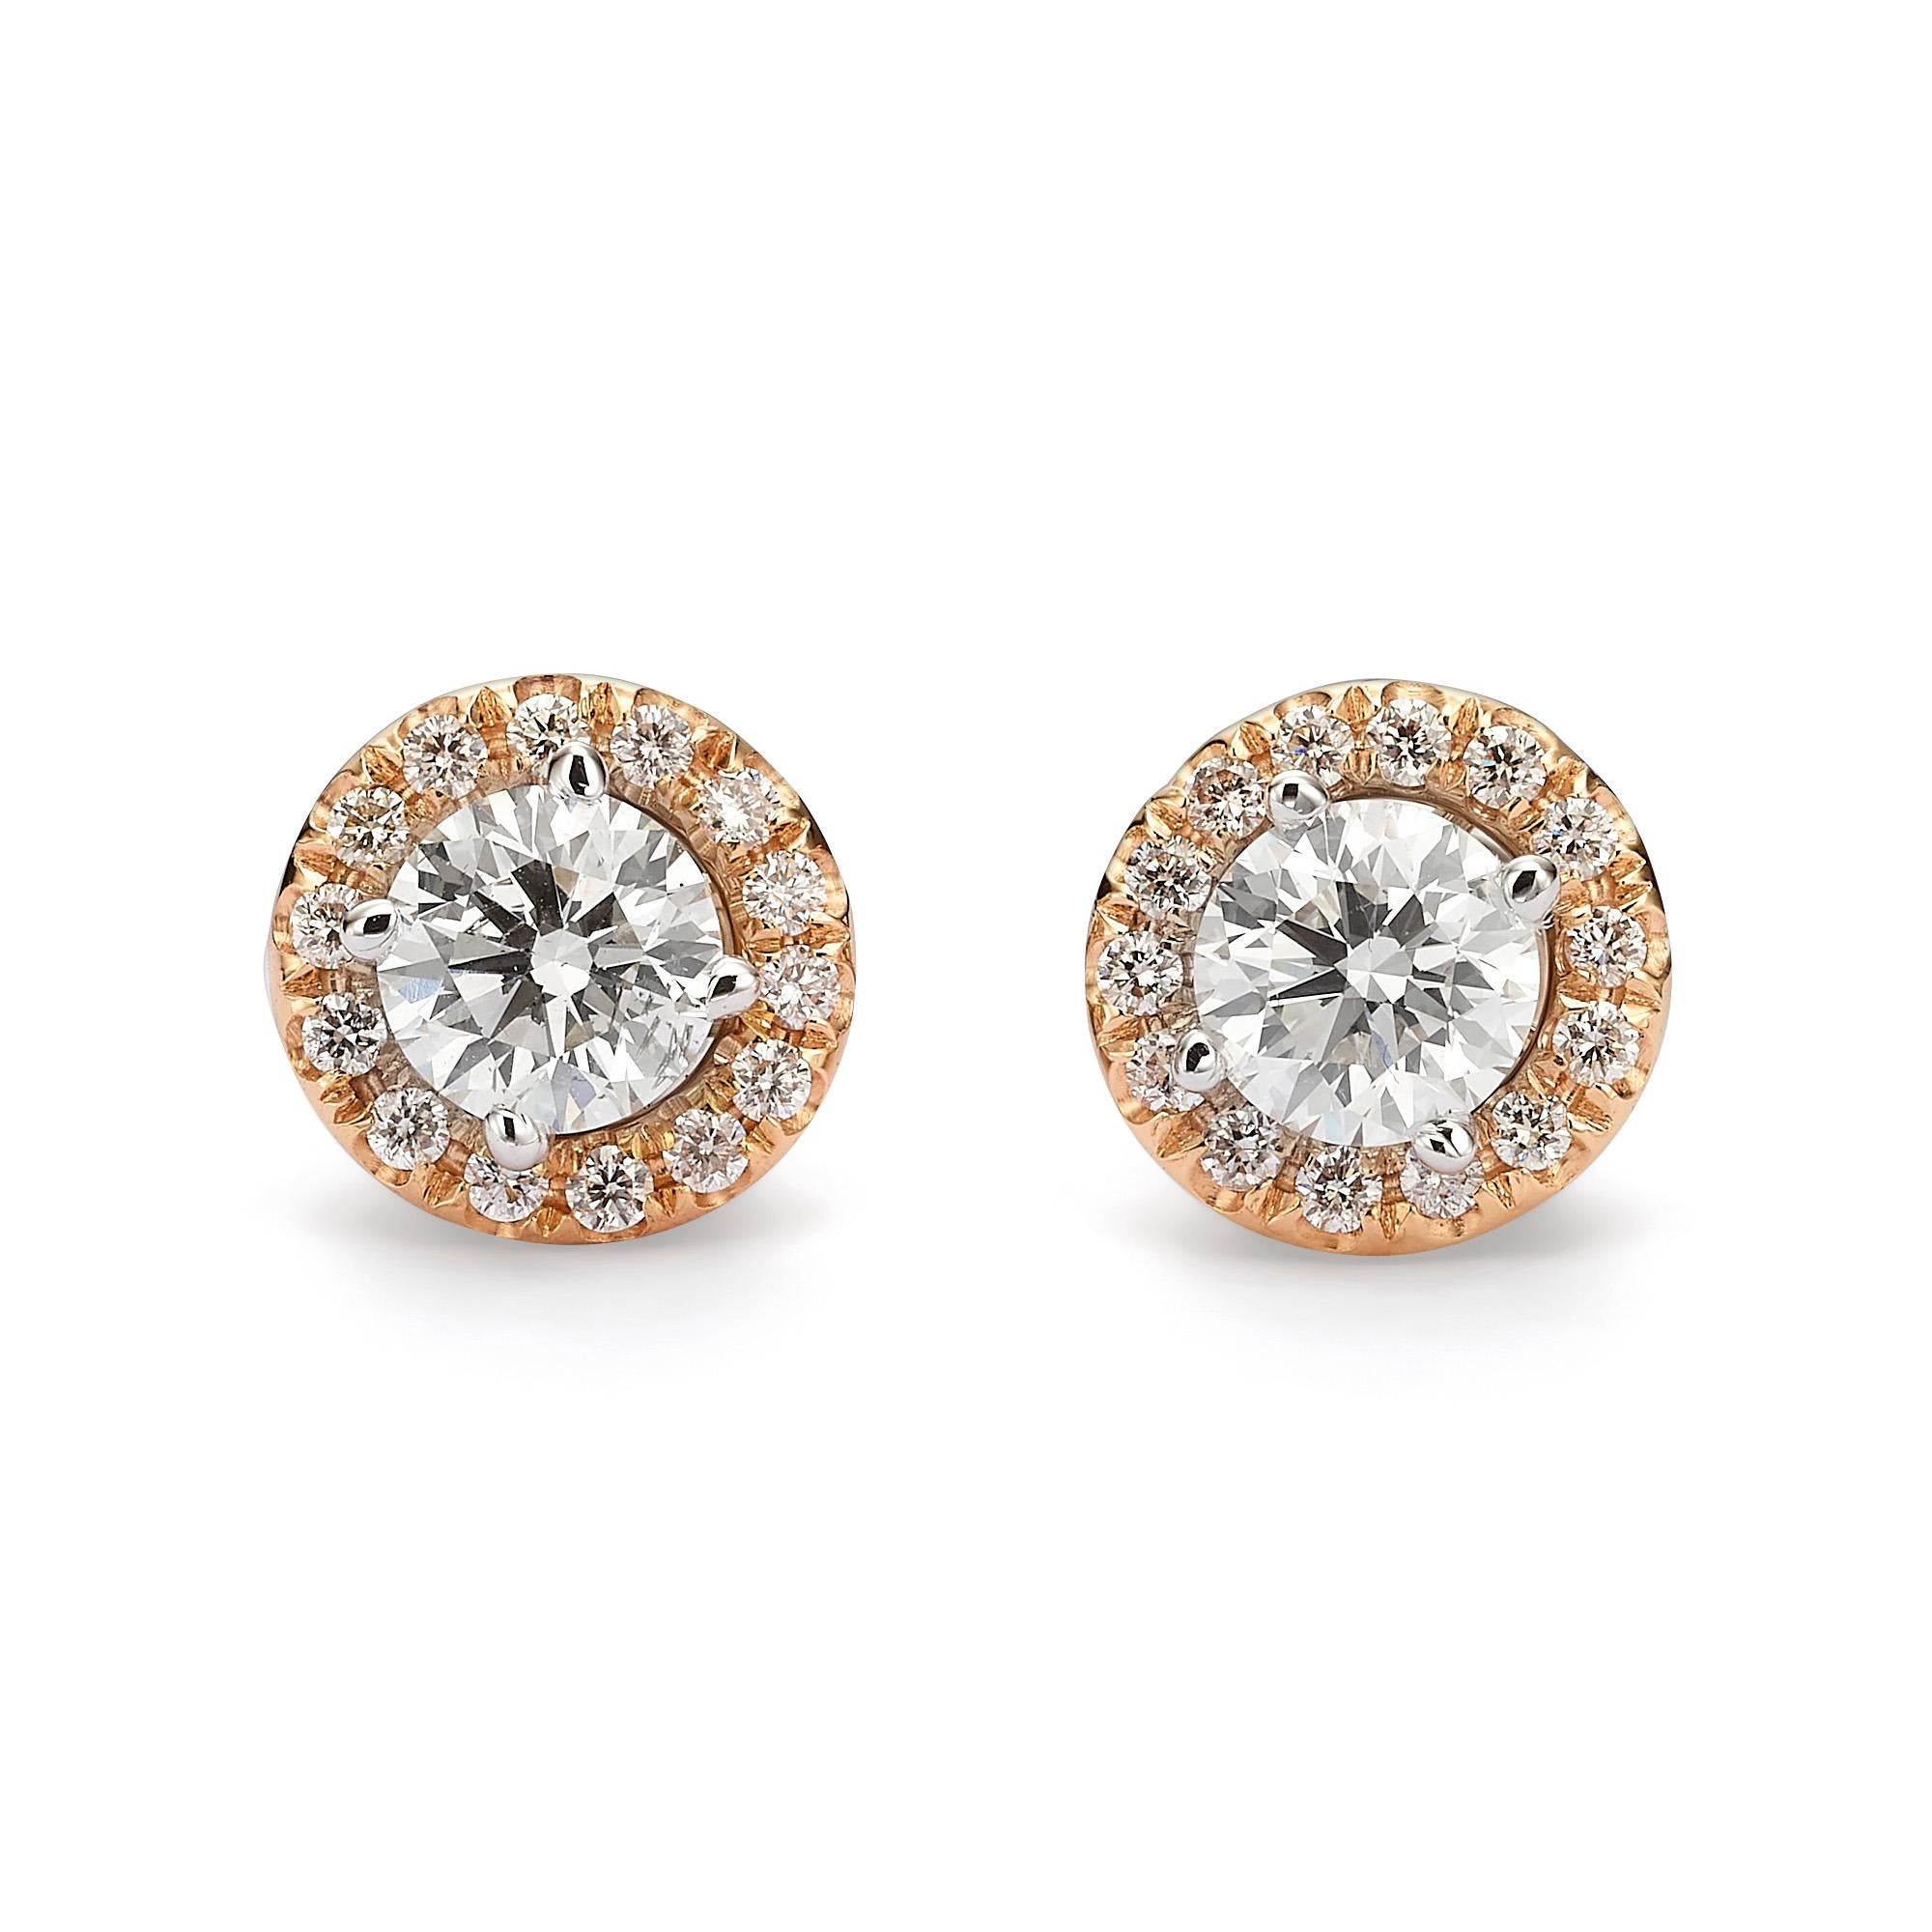 An assembling 18k white a rose gold halo earrings.other in 18K rose gold. Each earring has a center stone of  1.01 carats (combined total weight of 2.02 carats) H-I SI2-I1. The center stones are encircled by a loose rose gold jacket, adorned with